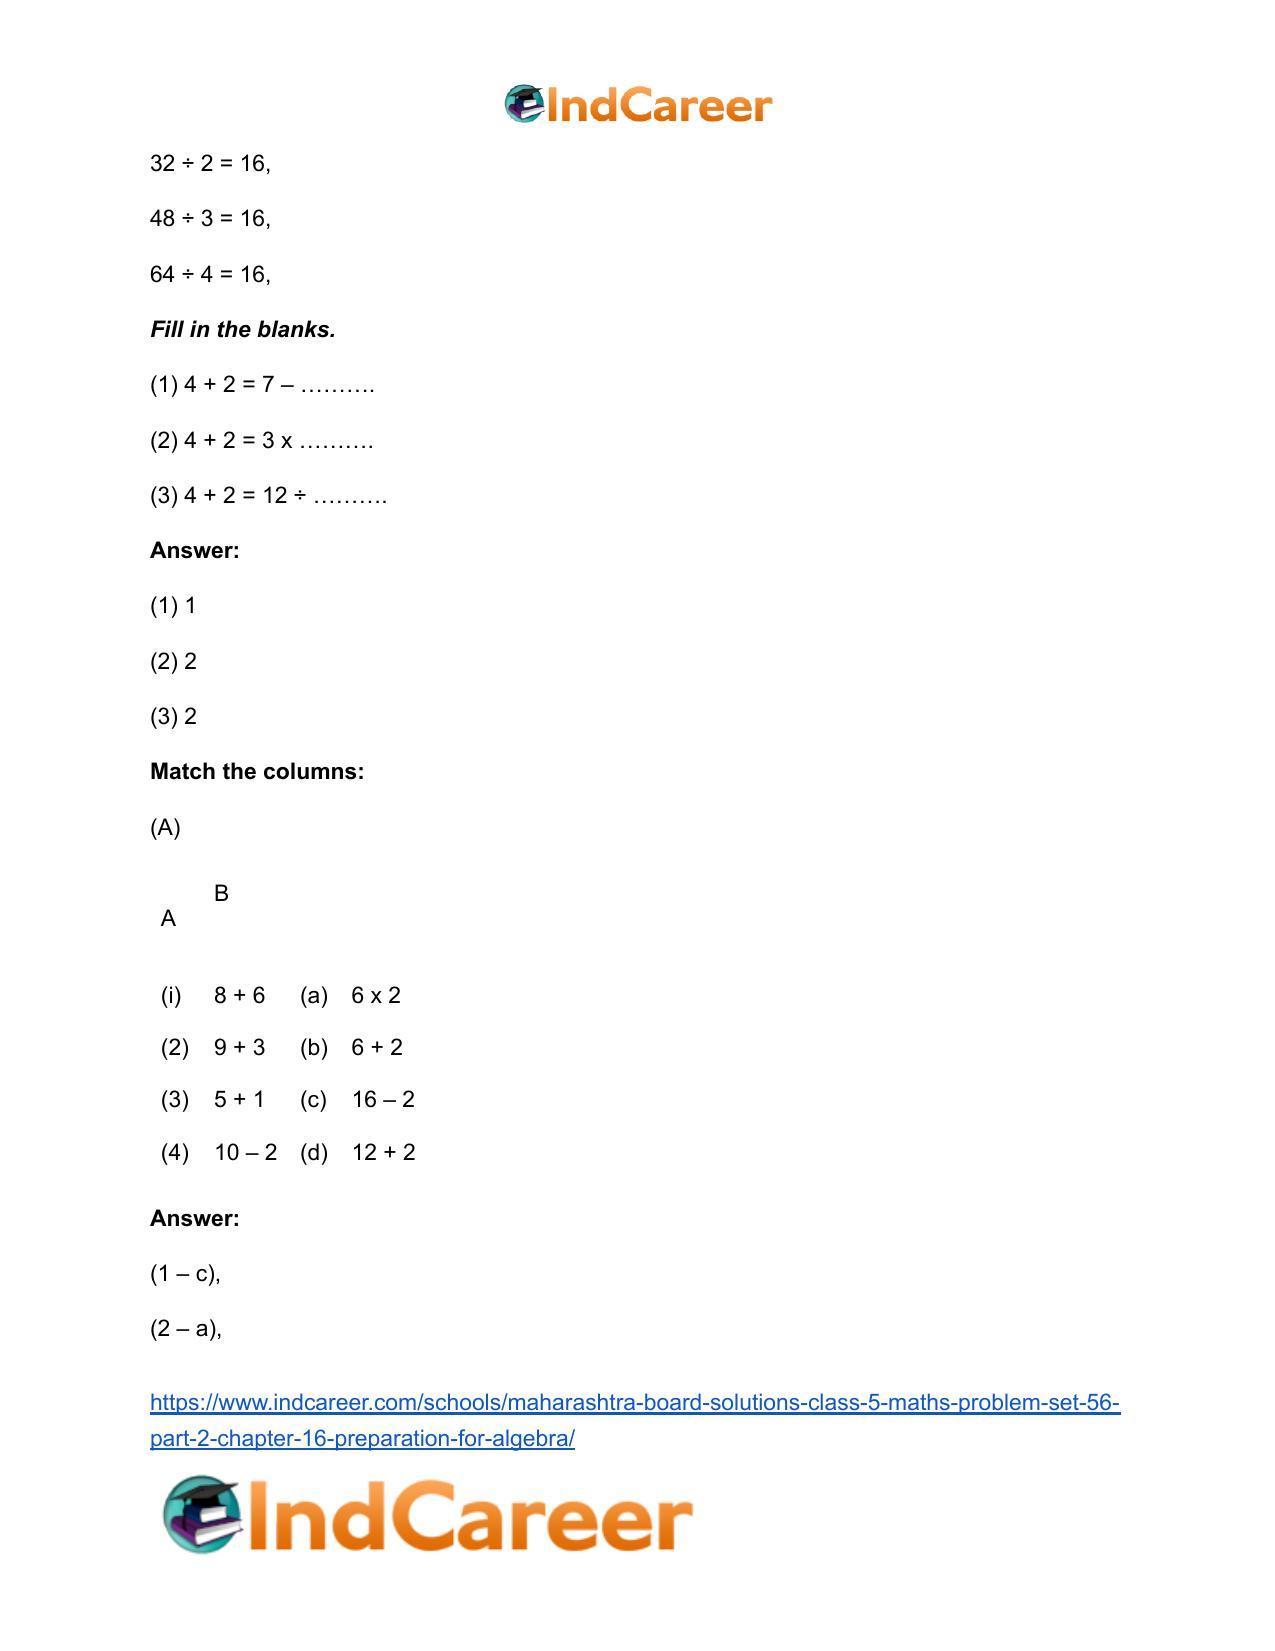 Maharashtra Board Solutions Class 5-Maths (Problem Set 56) - Part 2: Chapter 16- Preparation for Algebra - Page 5